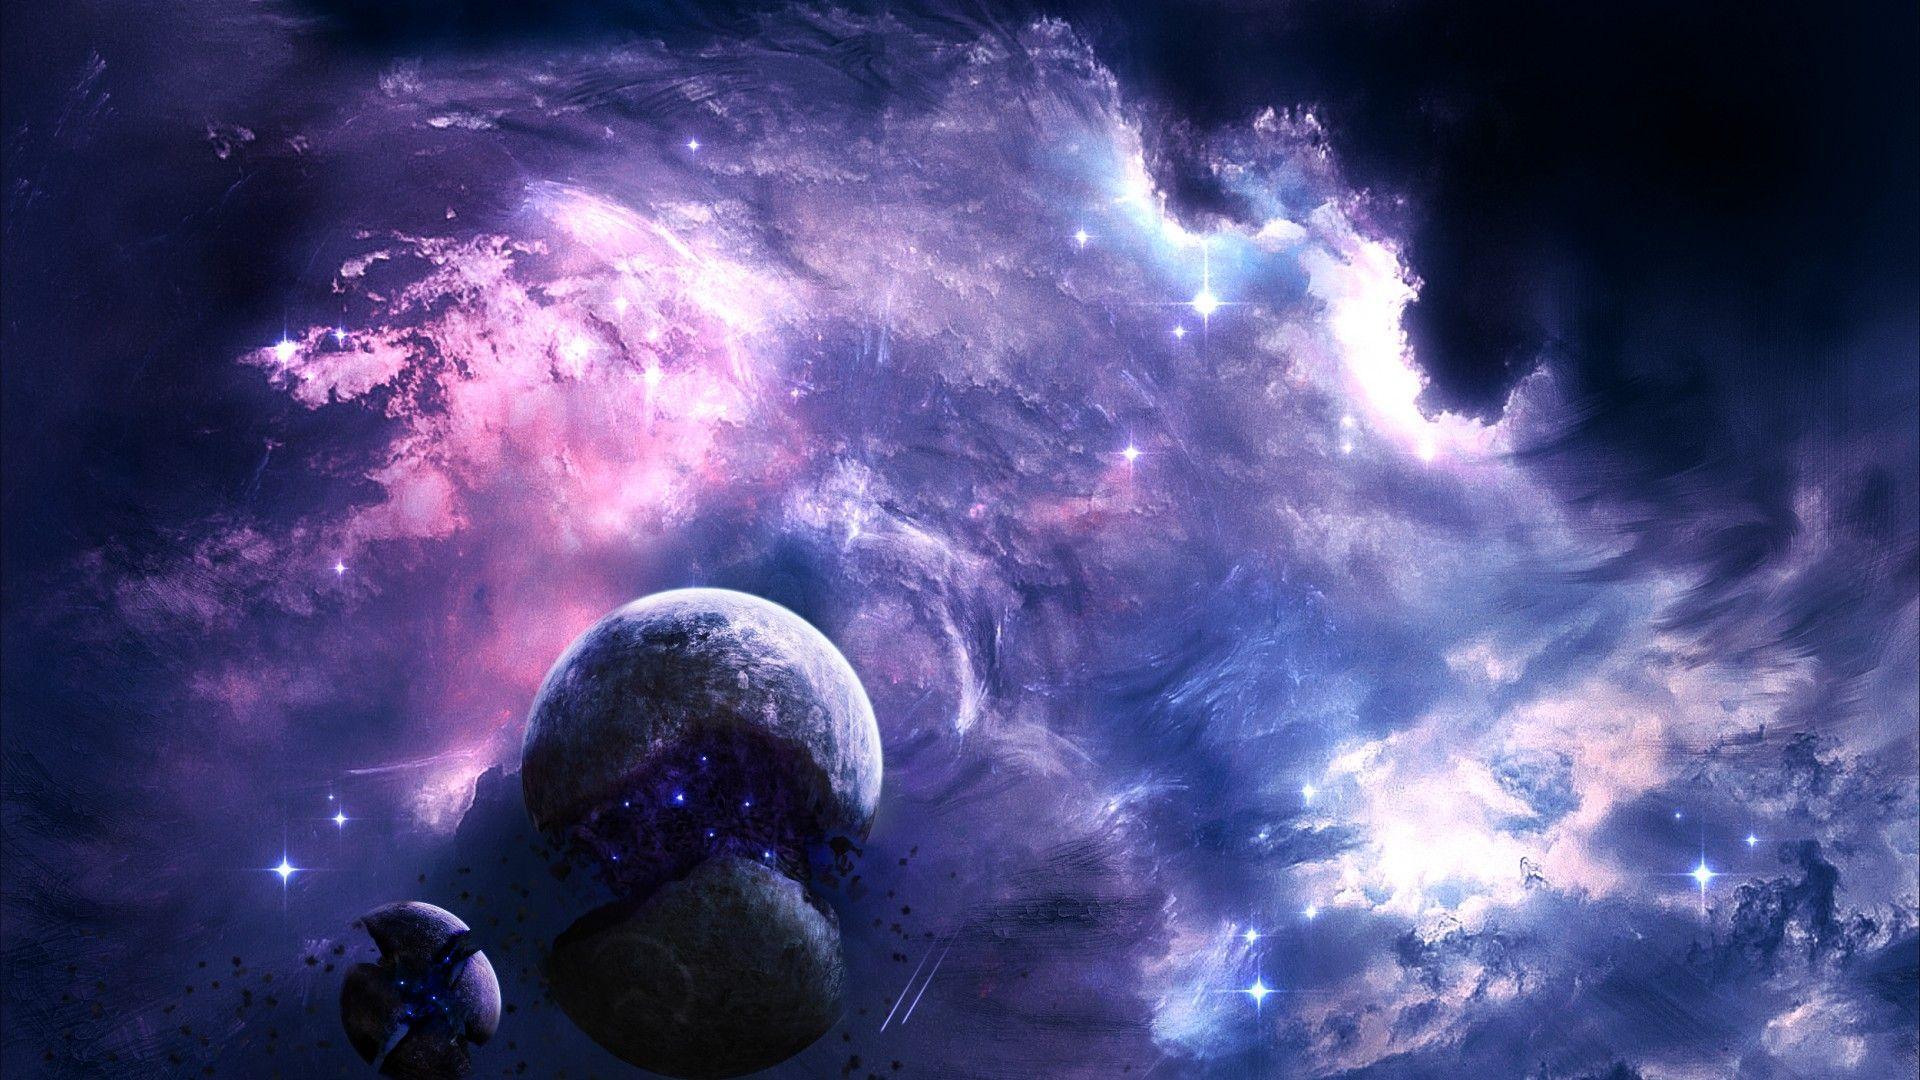 Space Backgrounds Wallpapers Wallpaper Cave 7554